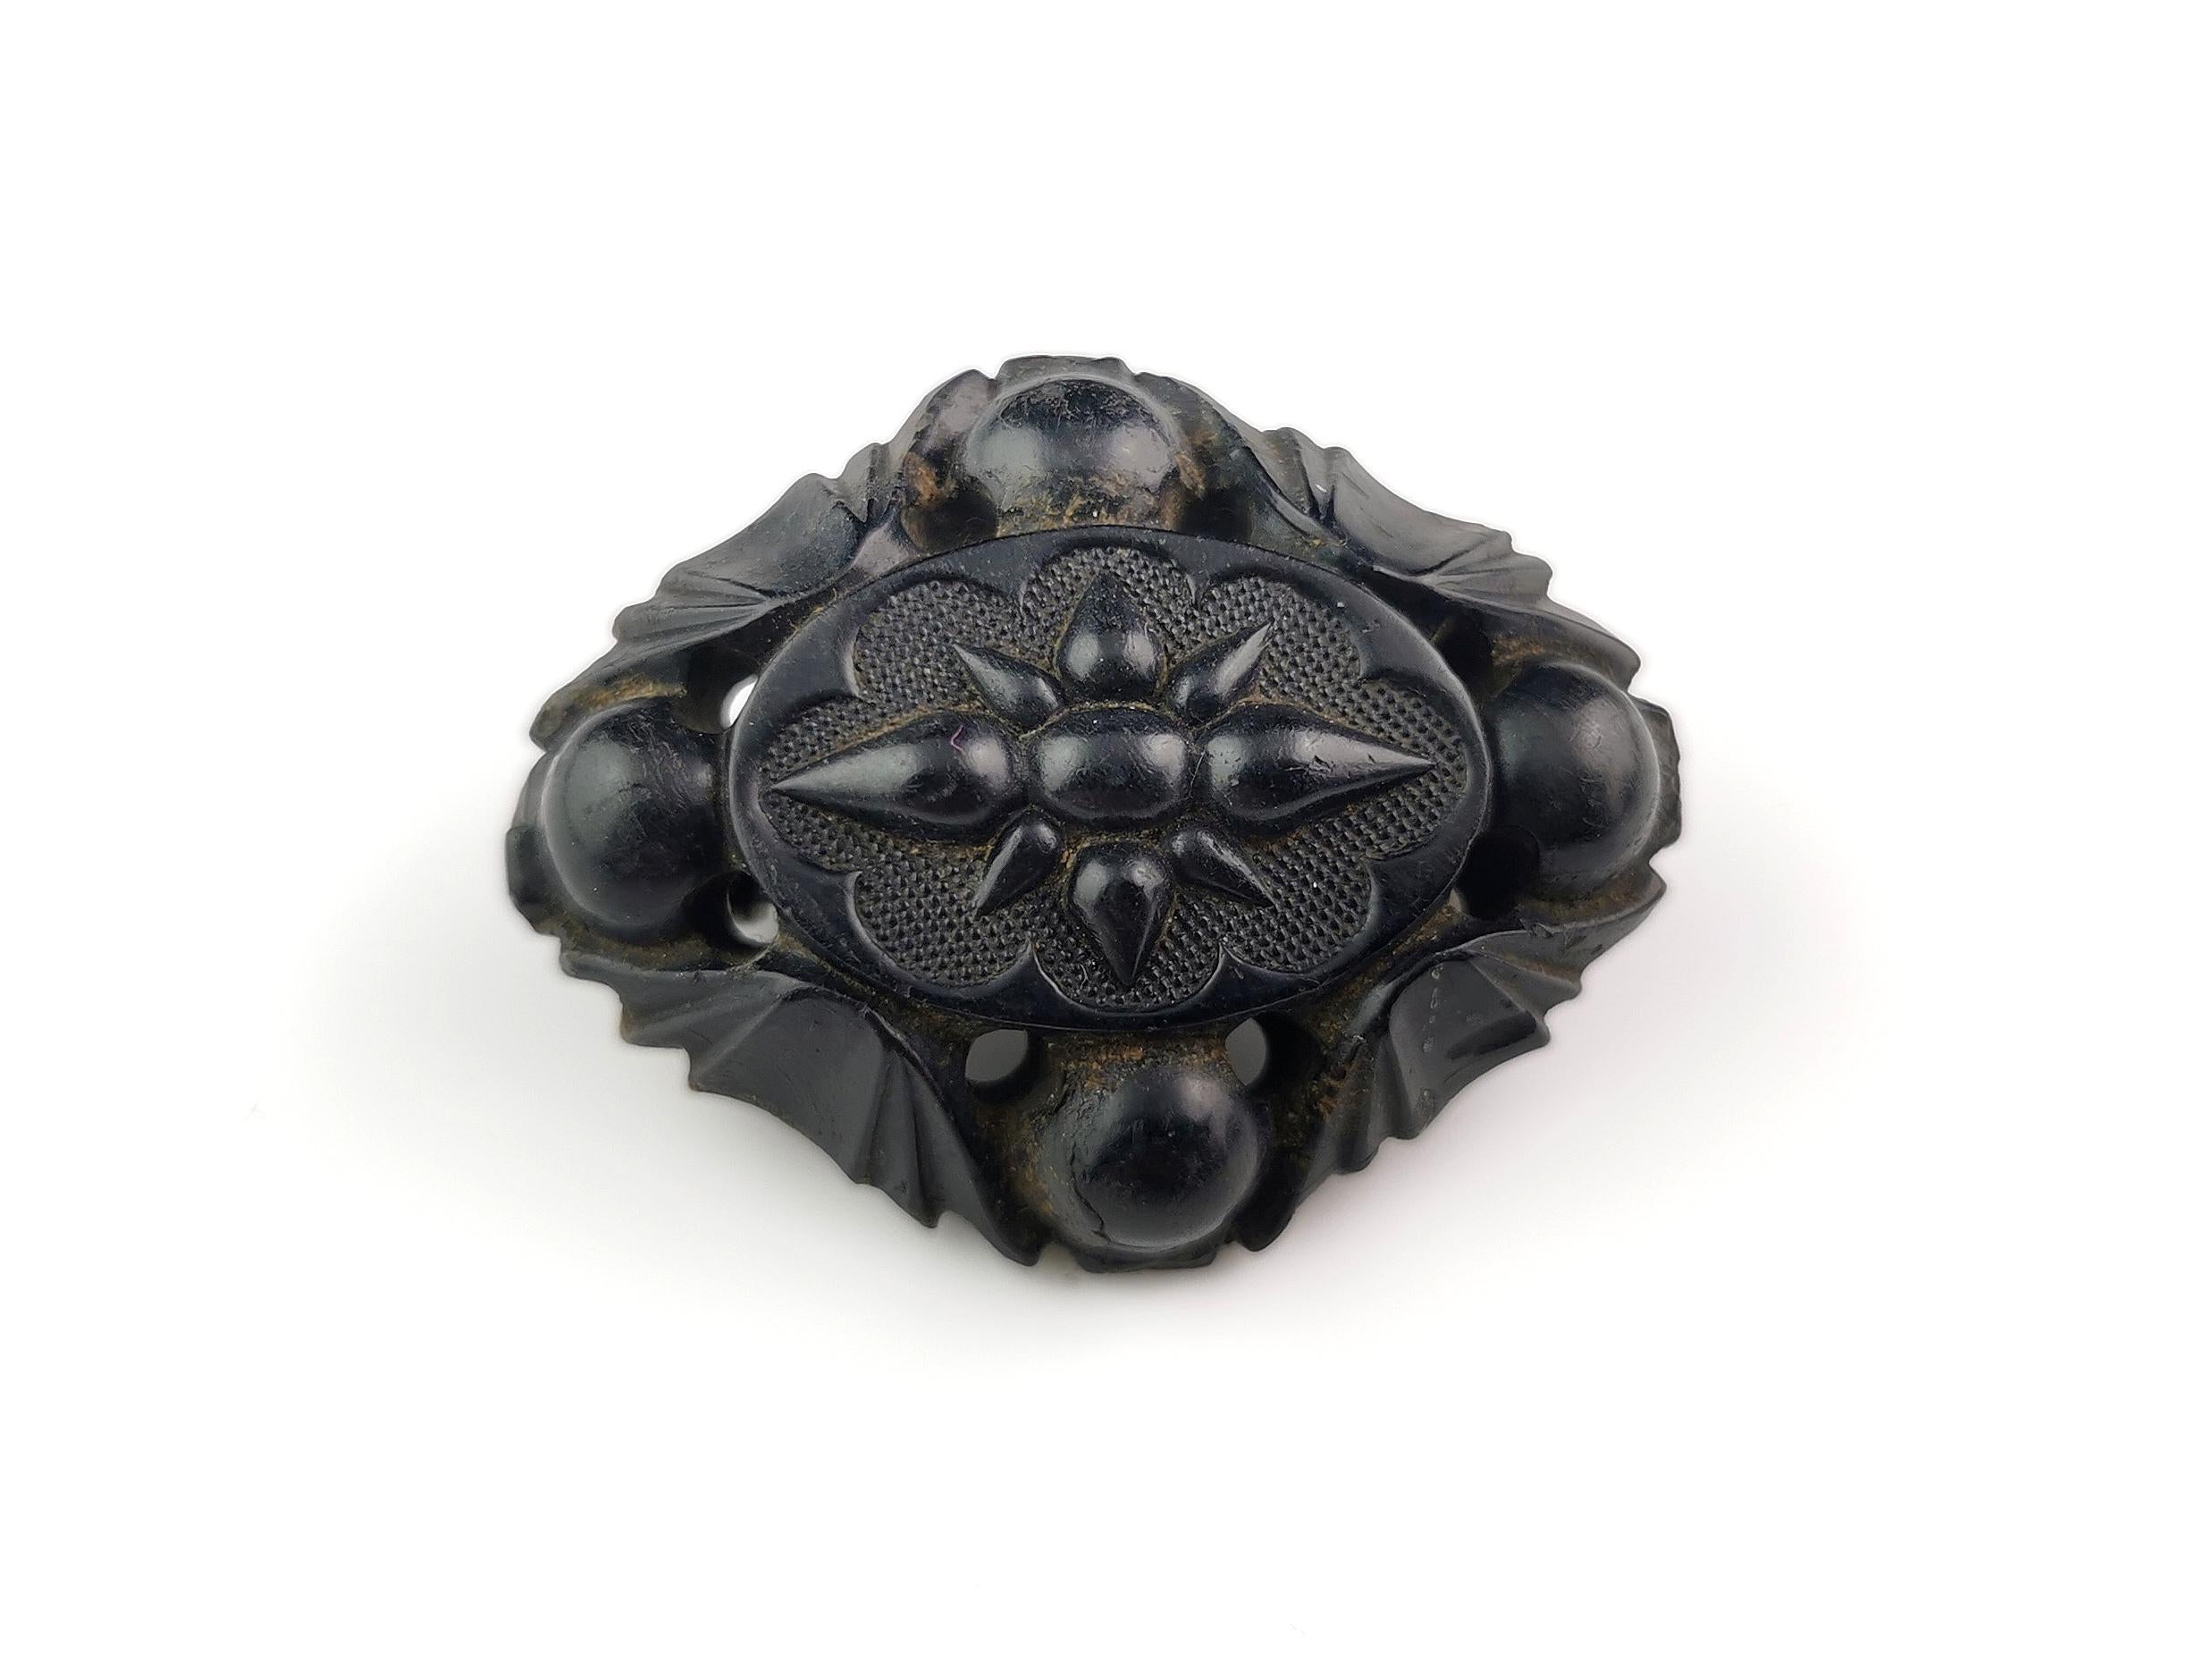 A gorgeous antique Victorian era Whitby Jet brooch.

It is a diamond shaped brooch with rounded corners and an engraved centre with a star shape carved into the middle.

It has four rounded beads to each corner.

A very attractive brooch.

Whitby